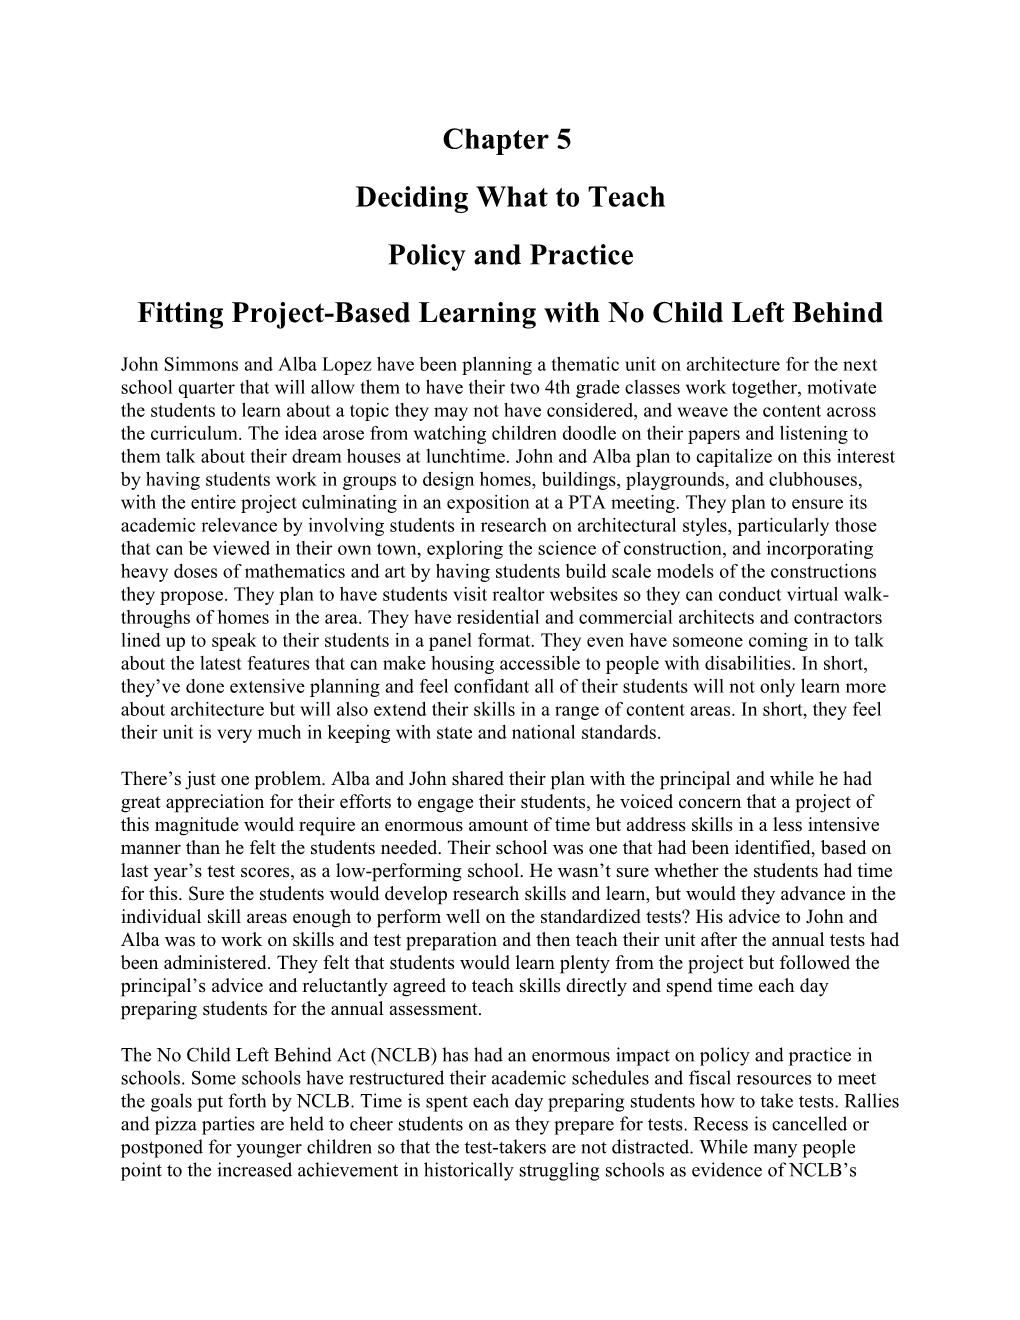 Fitting Project-Based Learning with No Child Left Behind